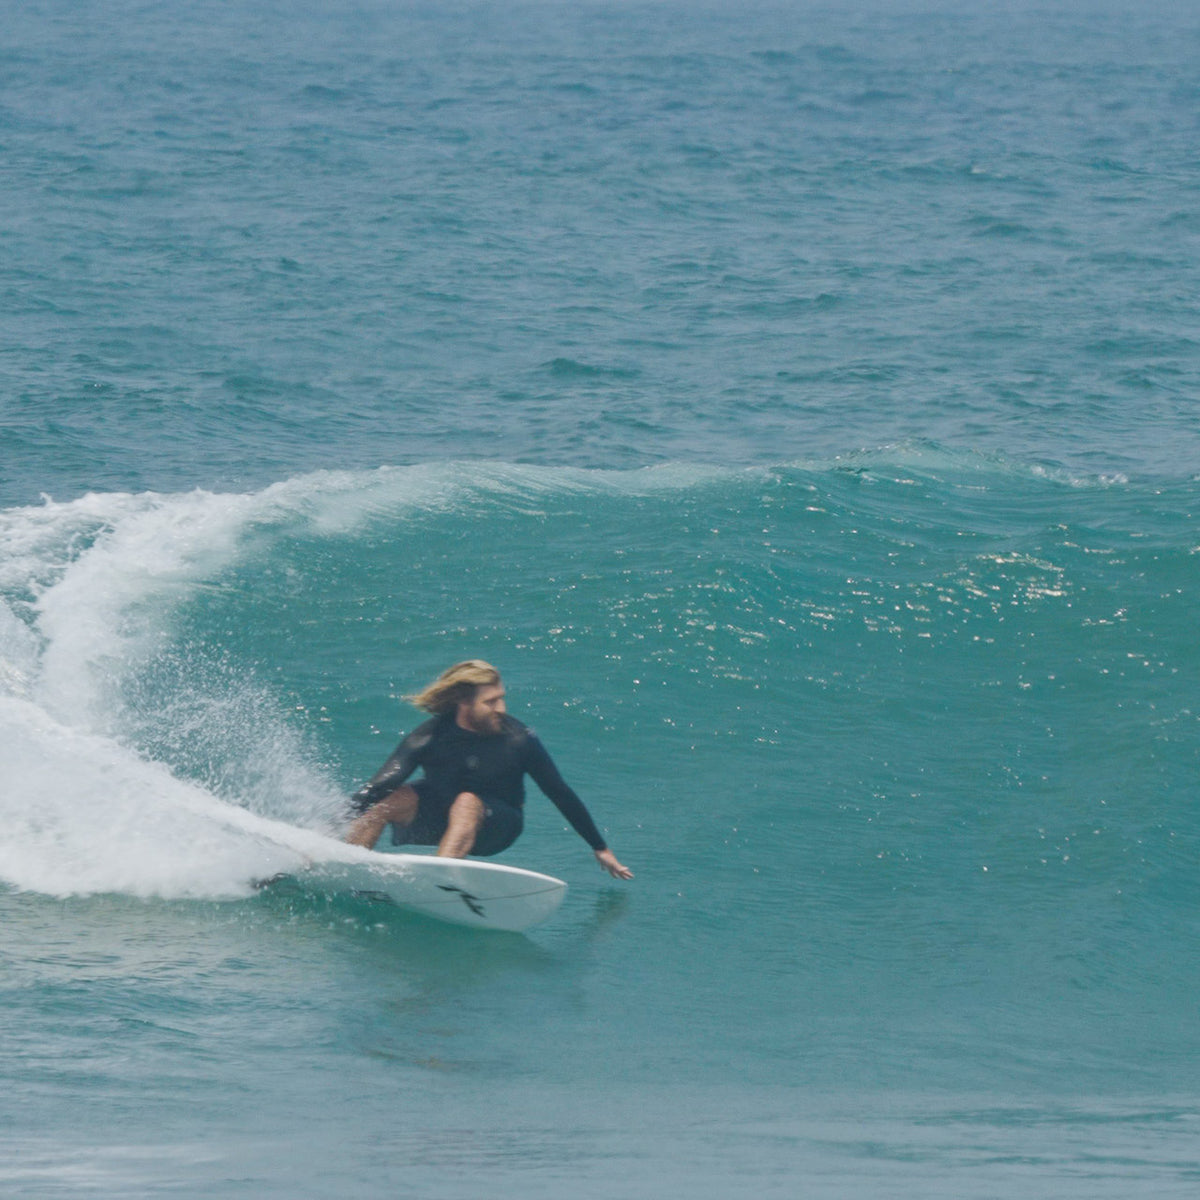 Wade Carmichael turning his 421 fish as hard as humanly possible - Rusty Surfboards